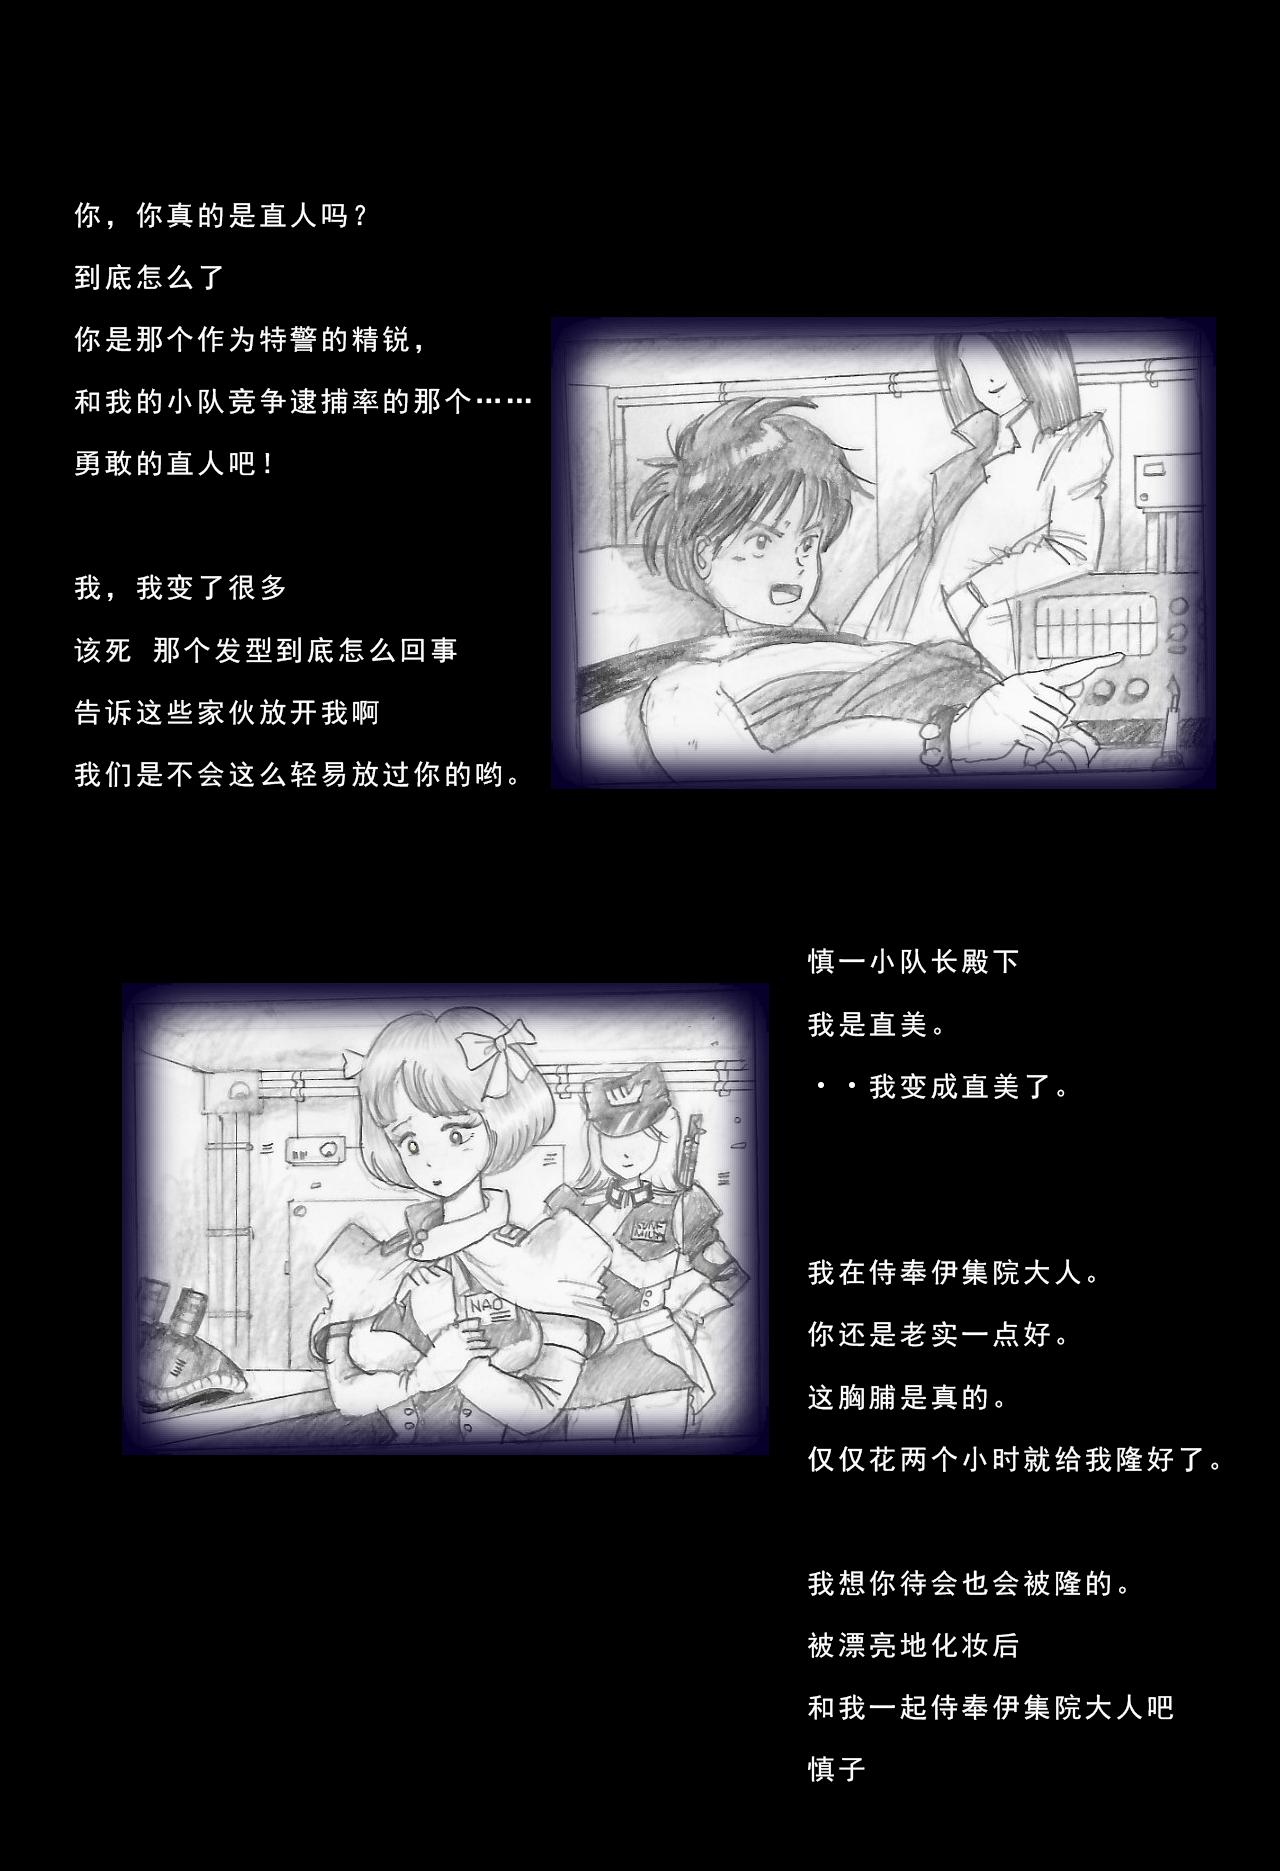 Special Police Third Platoon Captain Abduction Restraint Edition【chinese】 3